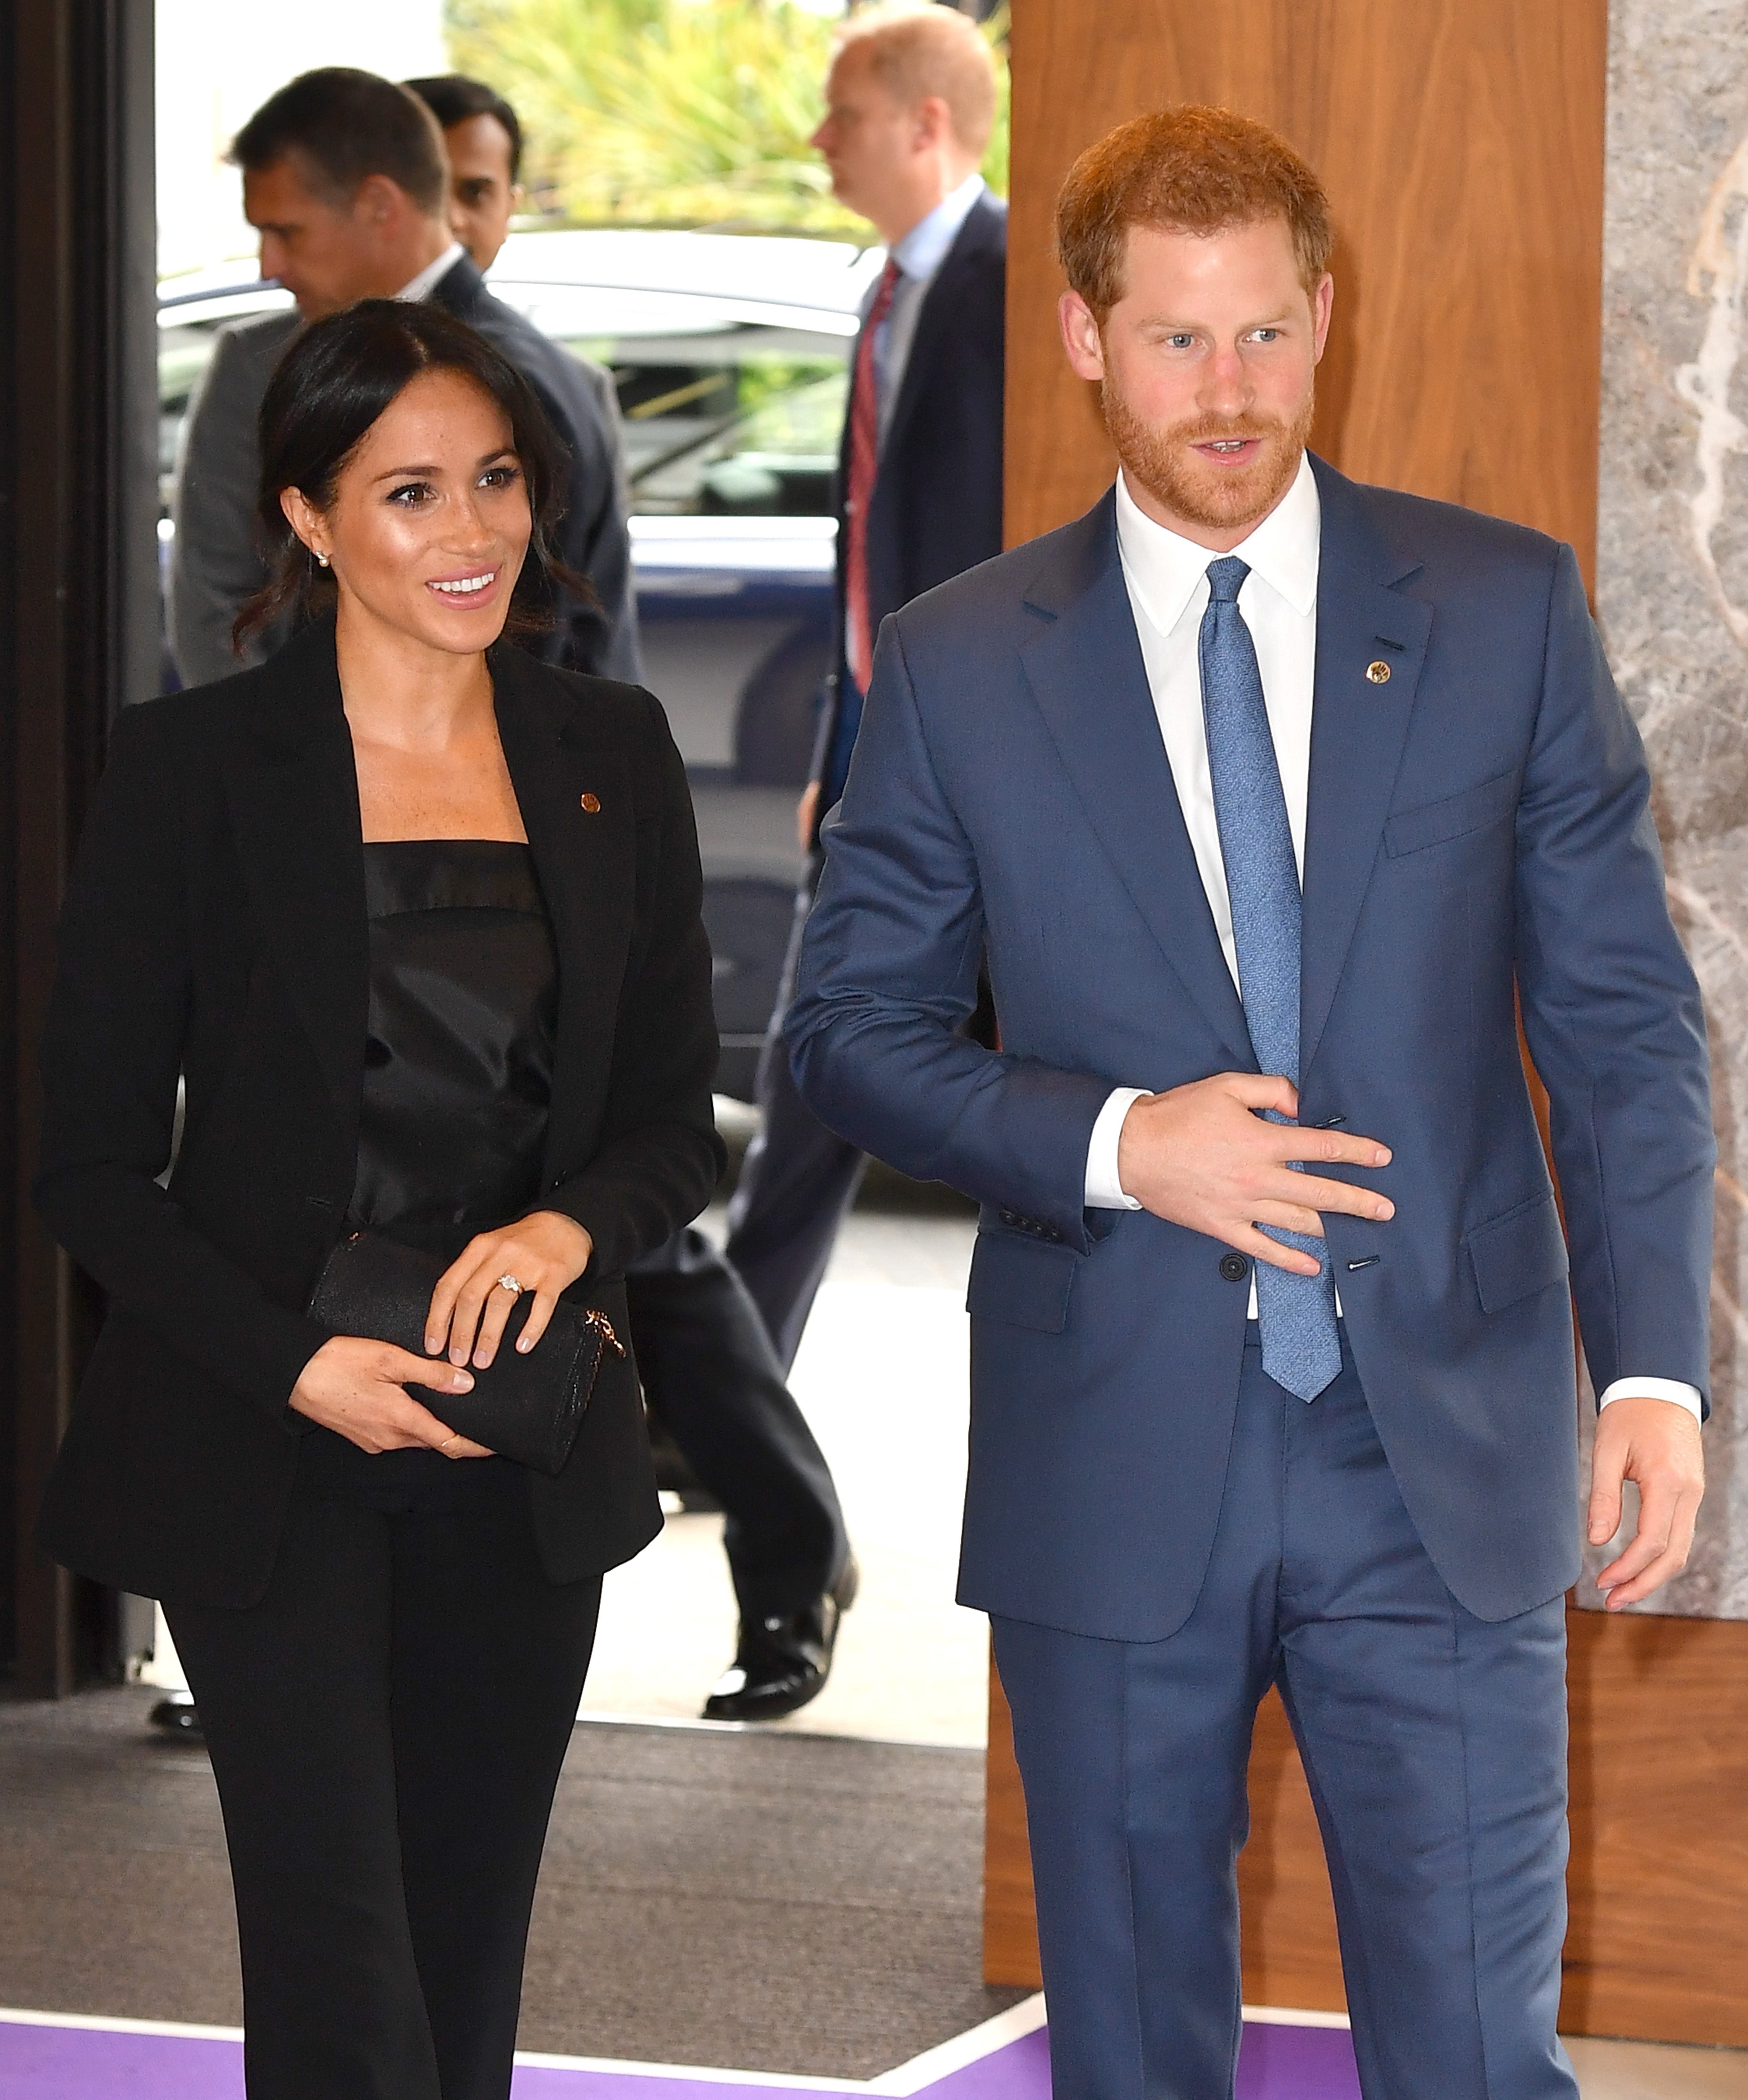 Meghan chose an all-black look for the event.